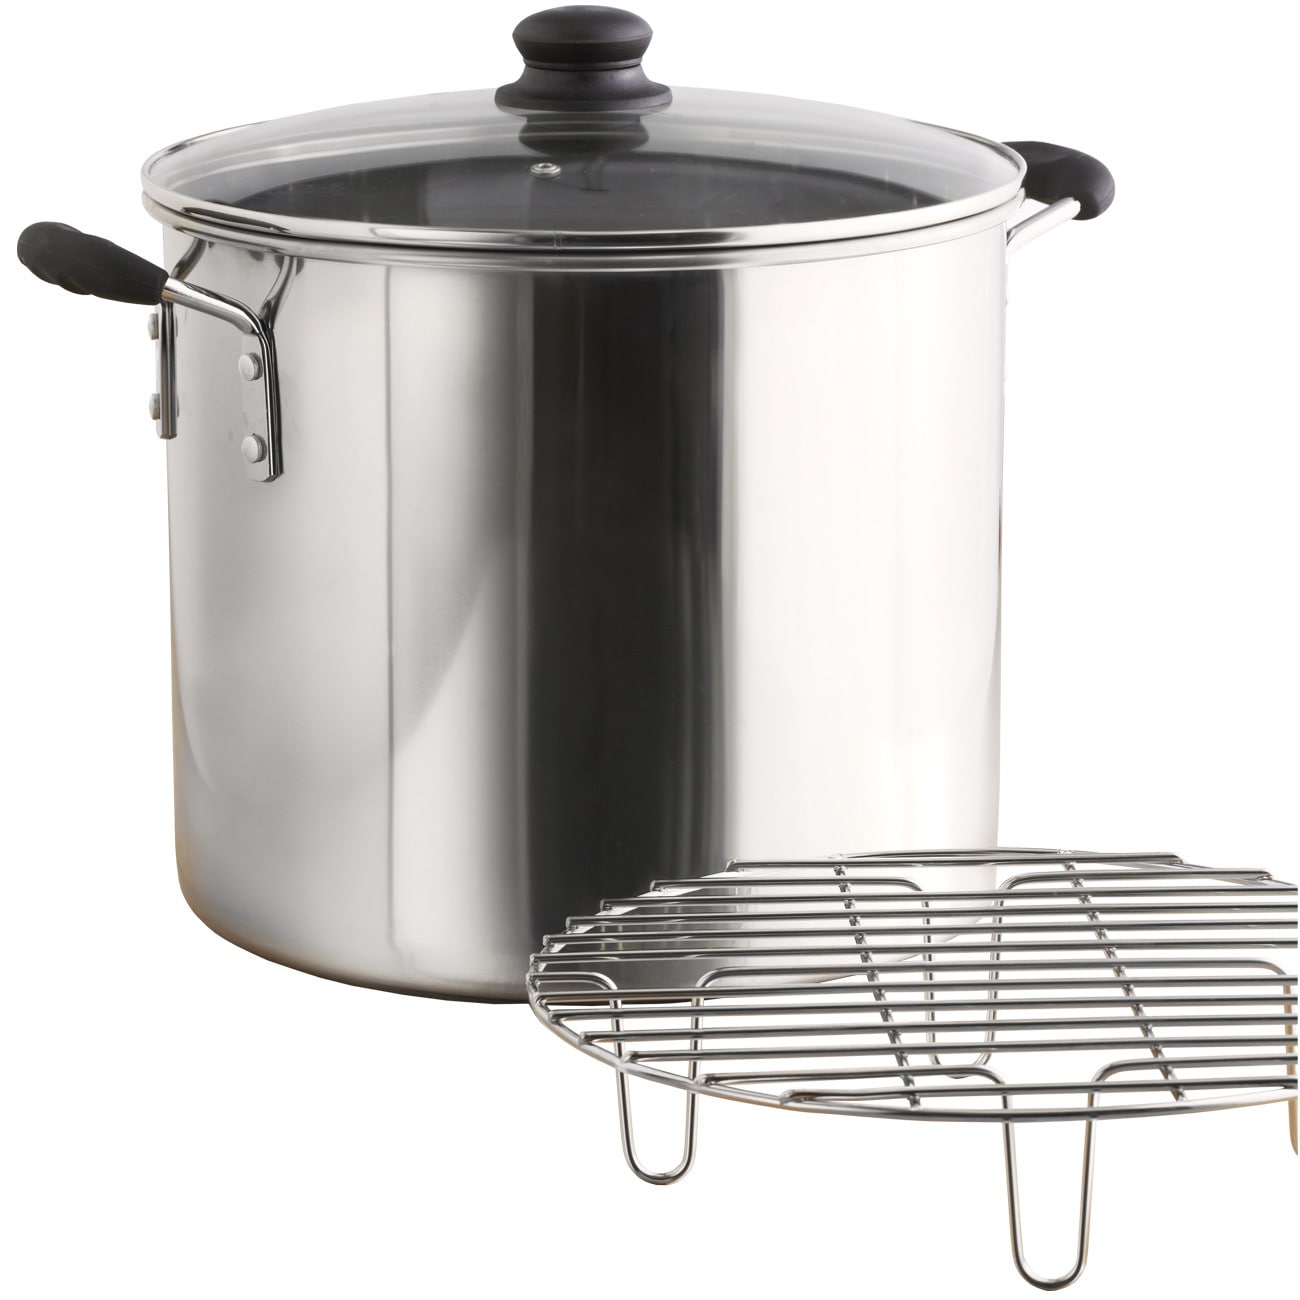 IMUSA IMUSA Stock Pot with Glass Lid and Soft Touch Handle 12 Quart - IMUSA